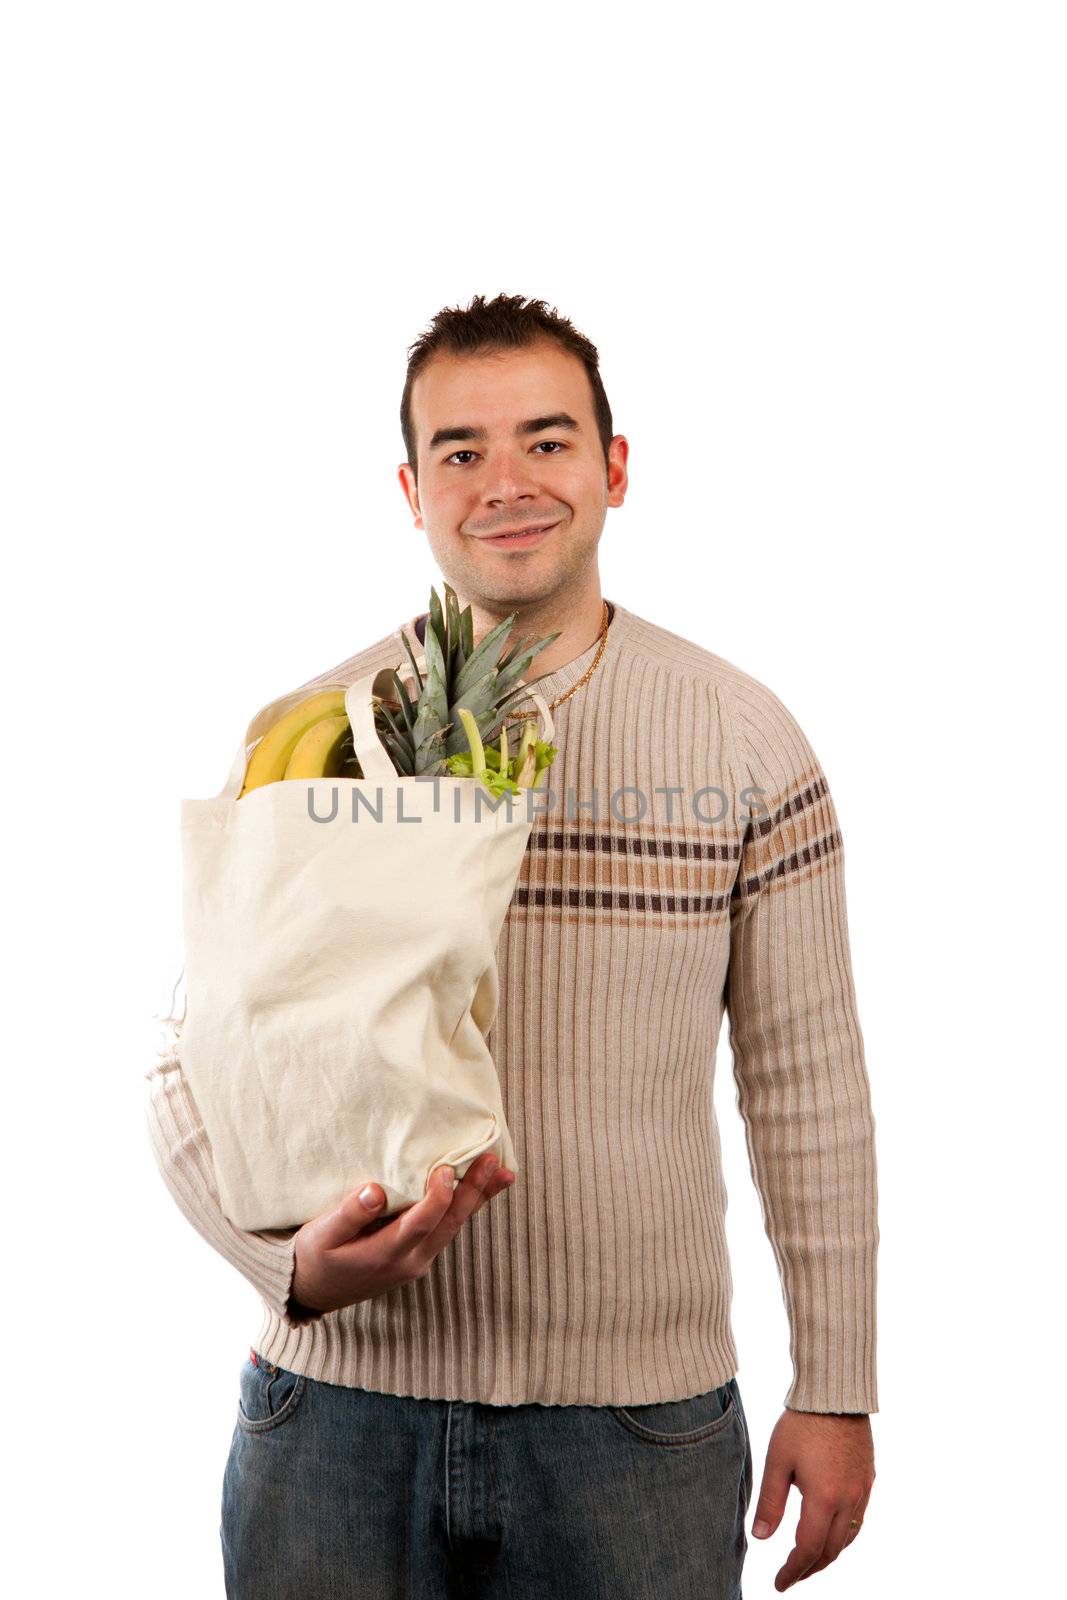 White male grocery shopper smiling while holding a canvas bag full of fresh food items.